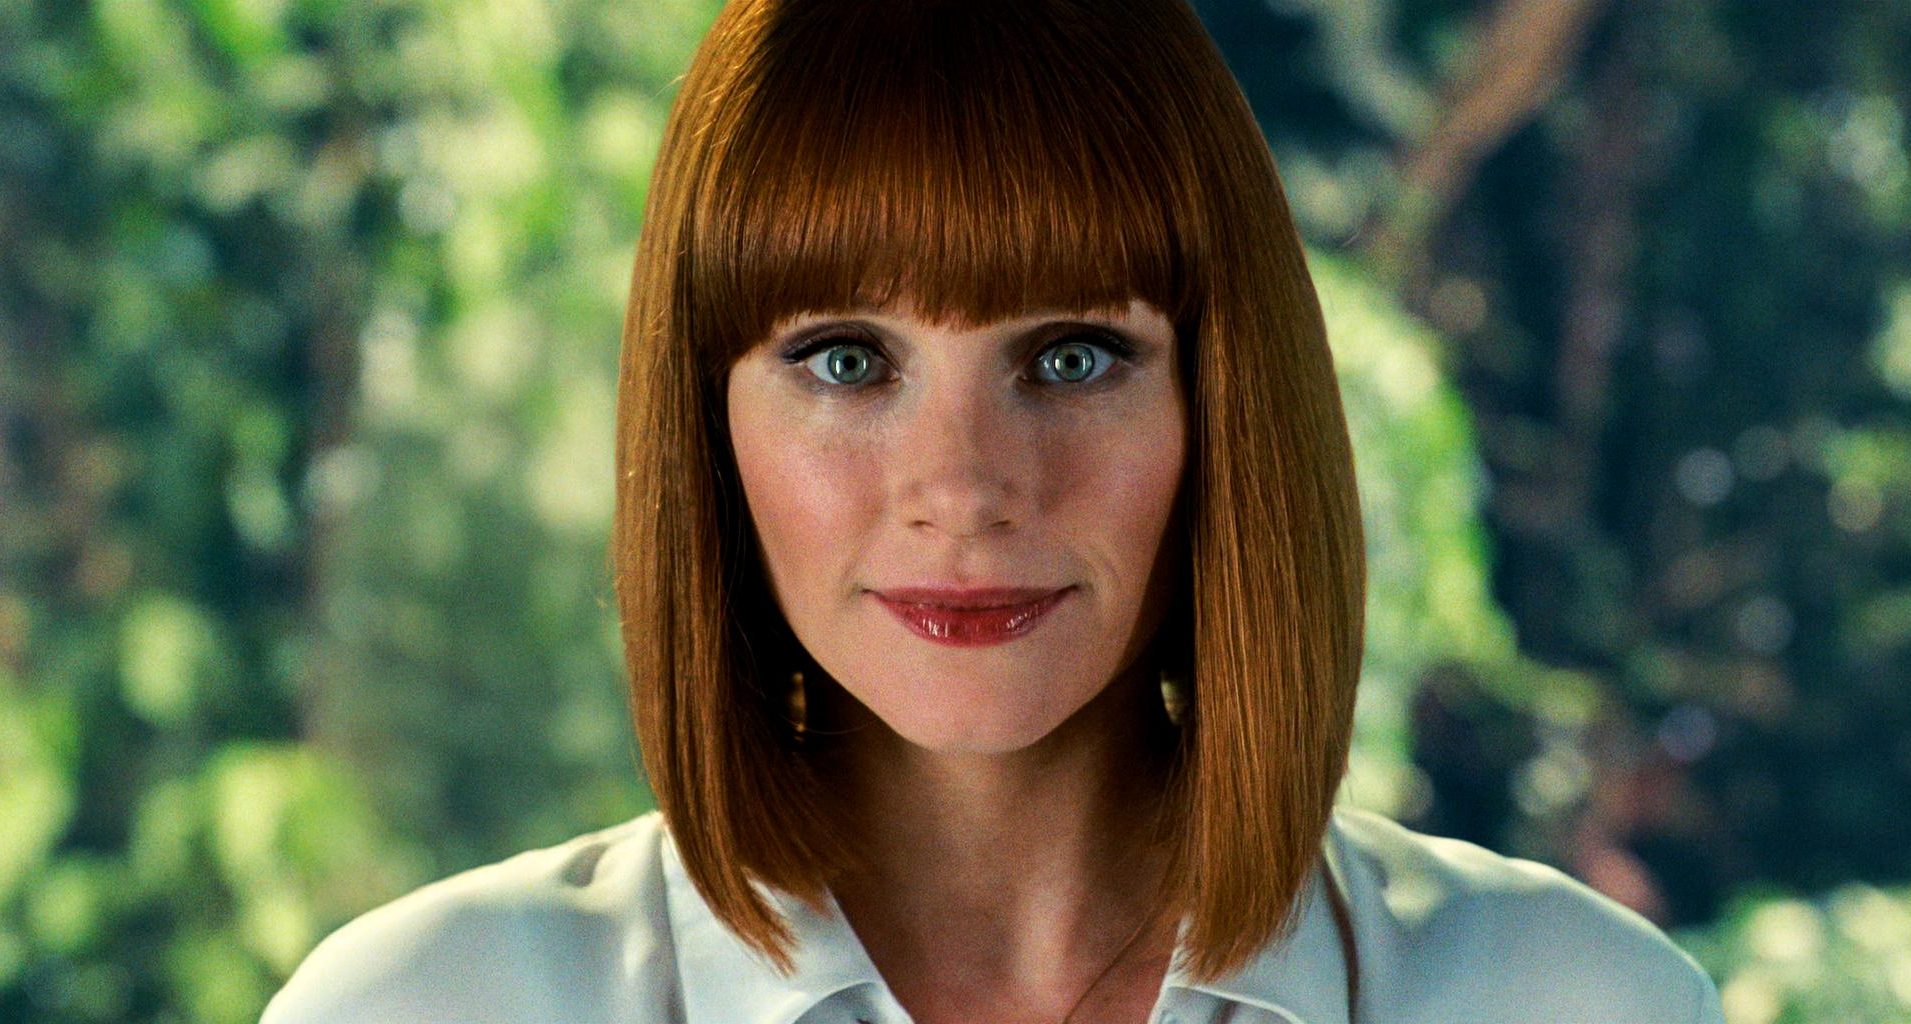 Bryce Dallas Howard: All New Movies and TV Shows in 2023 and 2024